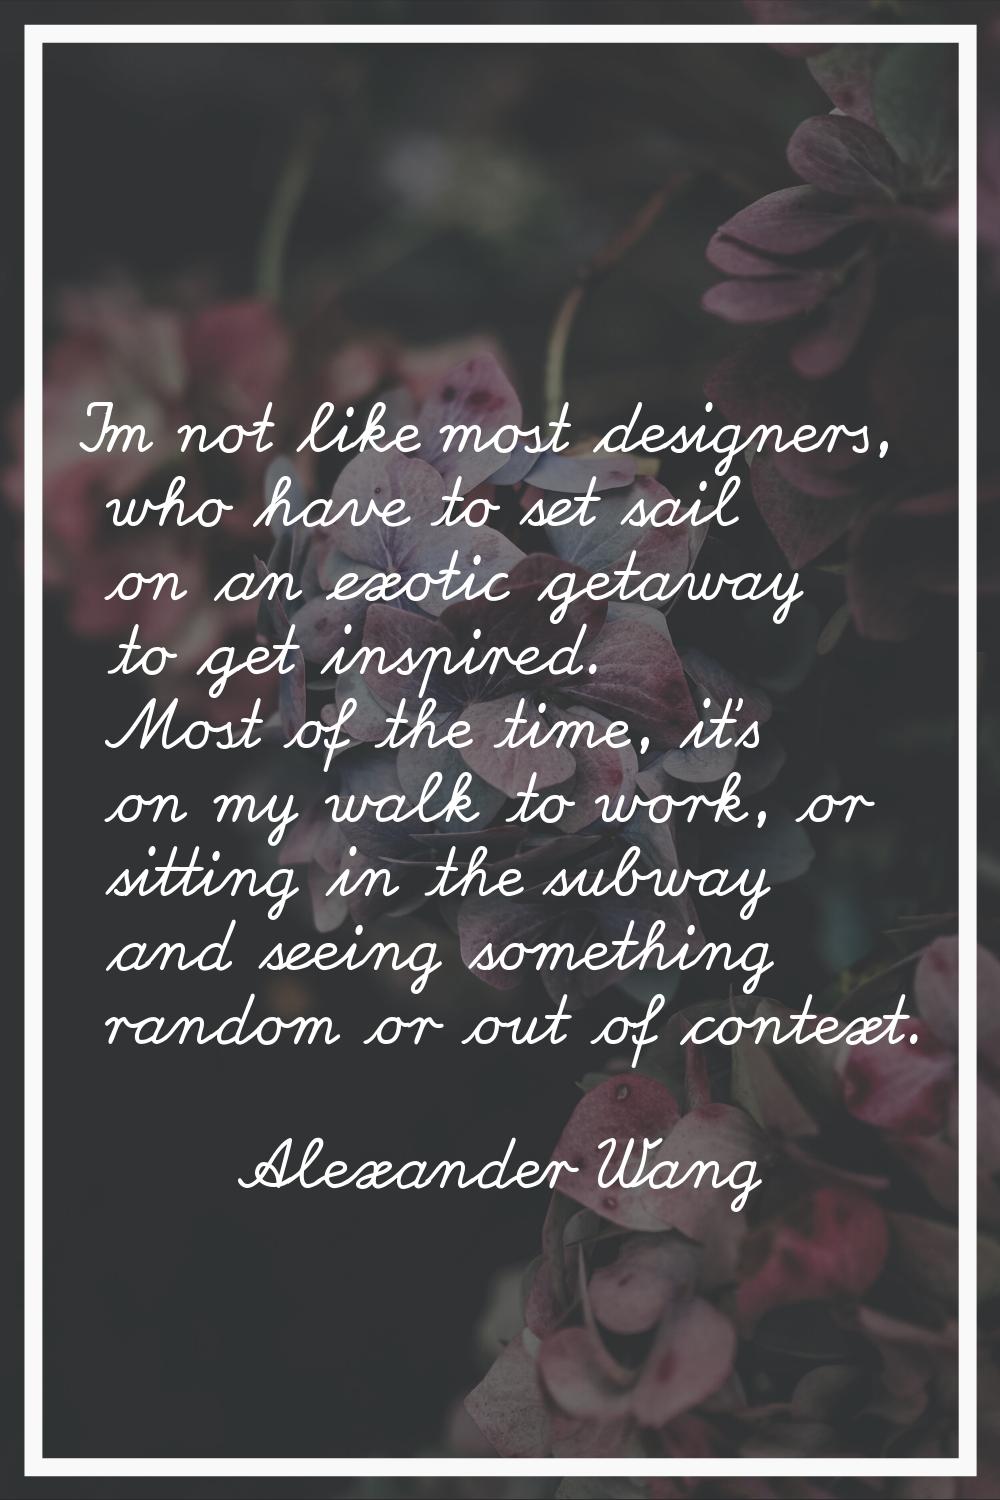 I'm not like most designers, who have to set sail on an exotic getaway to get inspired. Most of the